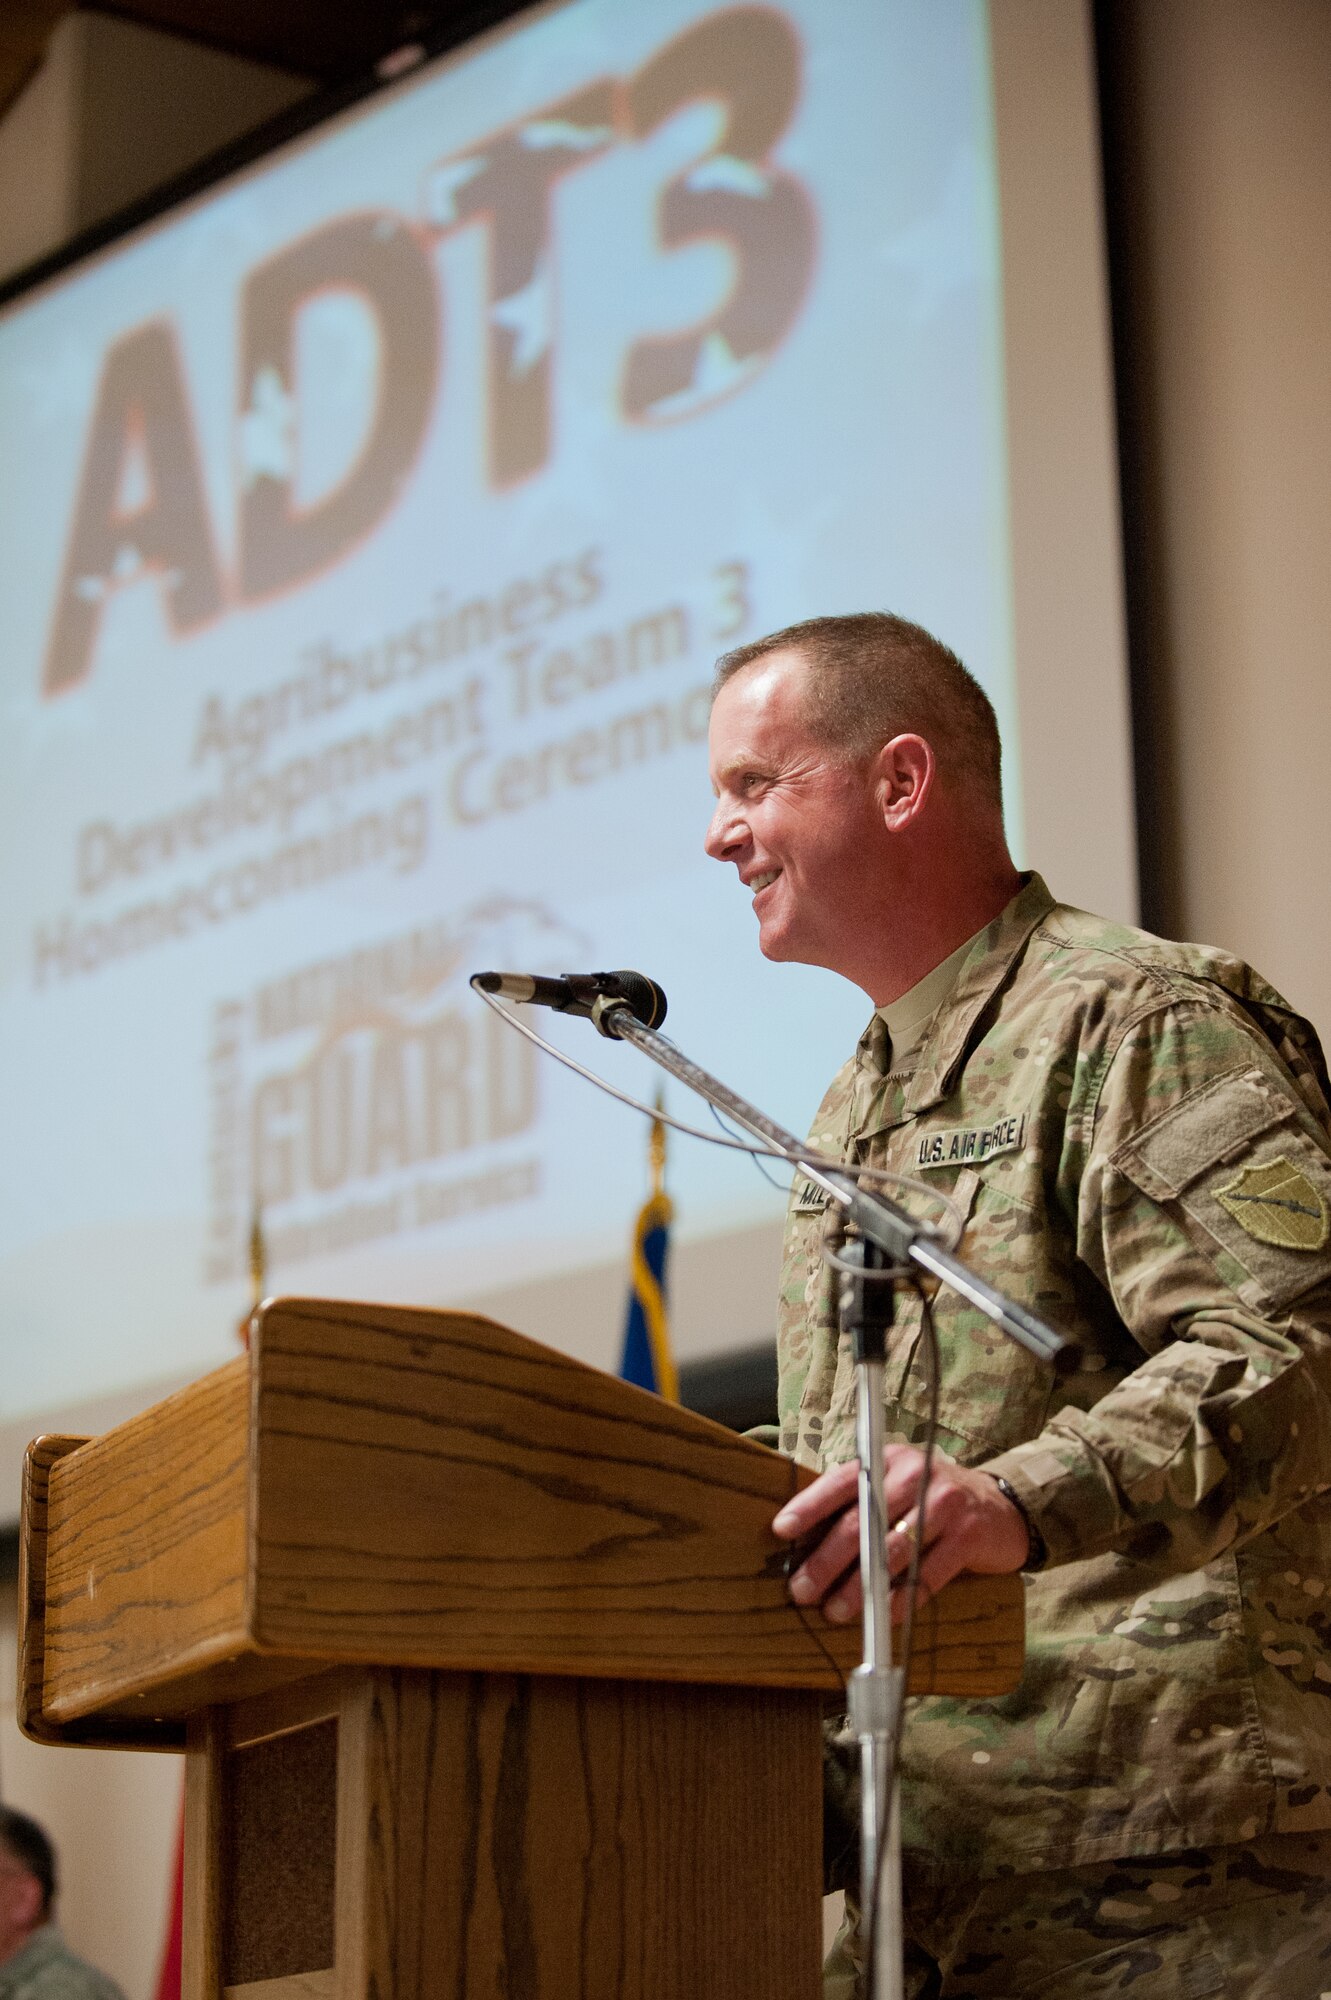 Col. Neil Mullaney, commander of Kentucky Agribusiness Development Team 3, recounts the accomplishments of his 58 Soldiers and Airmen during a homecoming ceremony held Feb. 28, 2012, at the Kentucky Air National Guard Base in Louisville, Ky. The team has been in Afghanistan for the past nine months, helping Afghan farmers develop sustainable agriculture. Its members were instrumental in coordinating the first-ever commercial mulberry harvest in the Panshir Valley, producing 75 metric tons of mulberries and netting $45,000 for local farmers. (U.S. Air Force photo by Maj. Dale Greer)